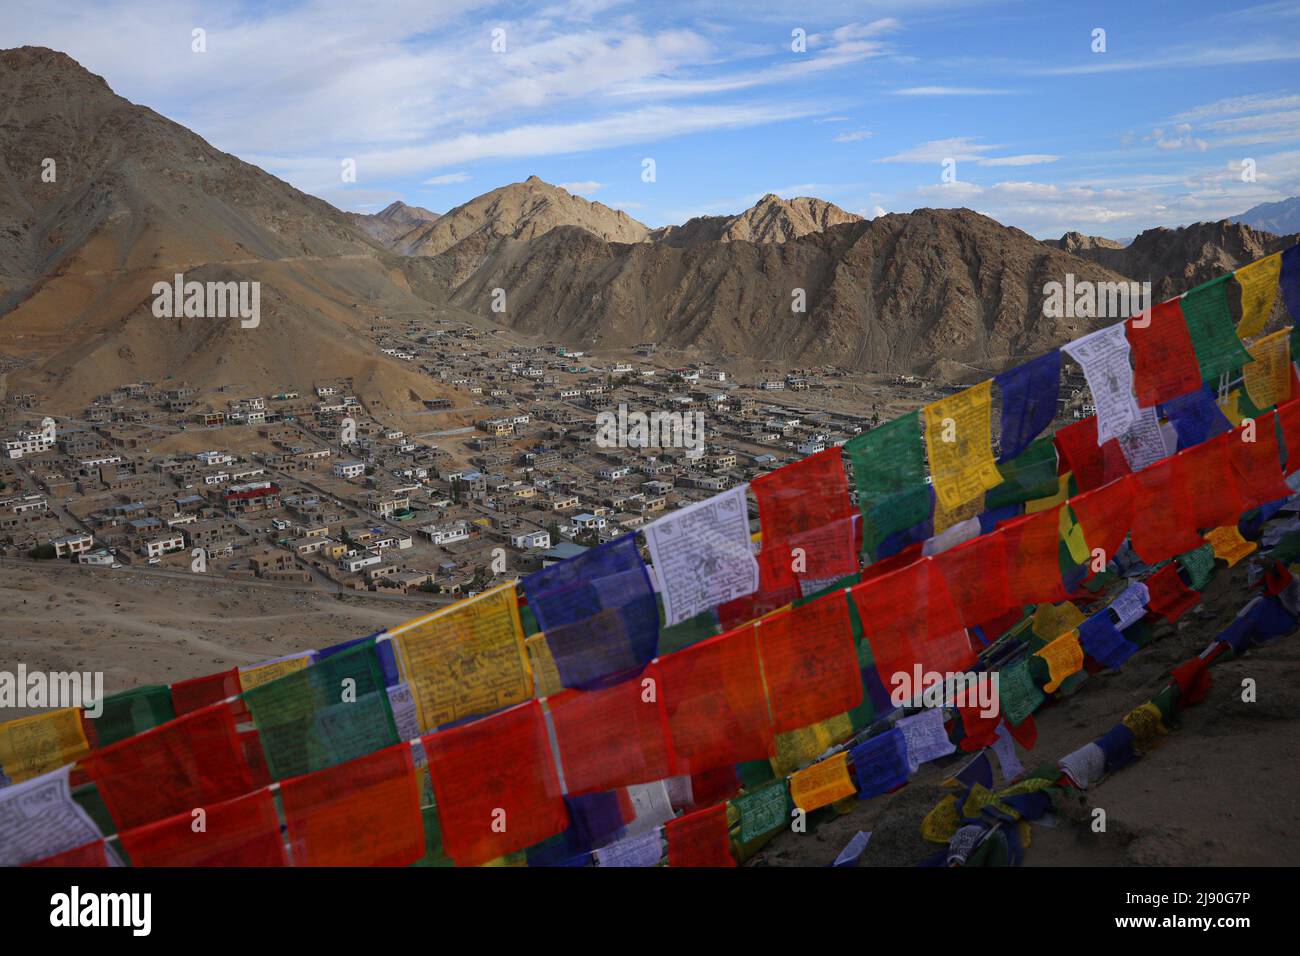 A view of Leh district, of Ladakh. Leh, a cold desert is situated at an average elevation of 3,500 metres. Stock Photo